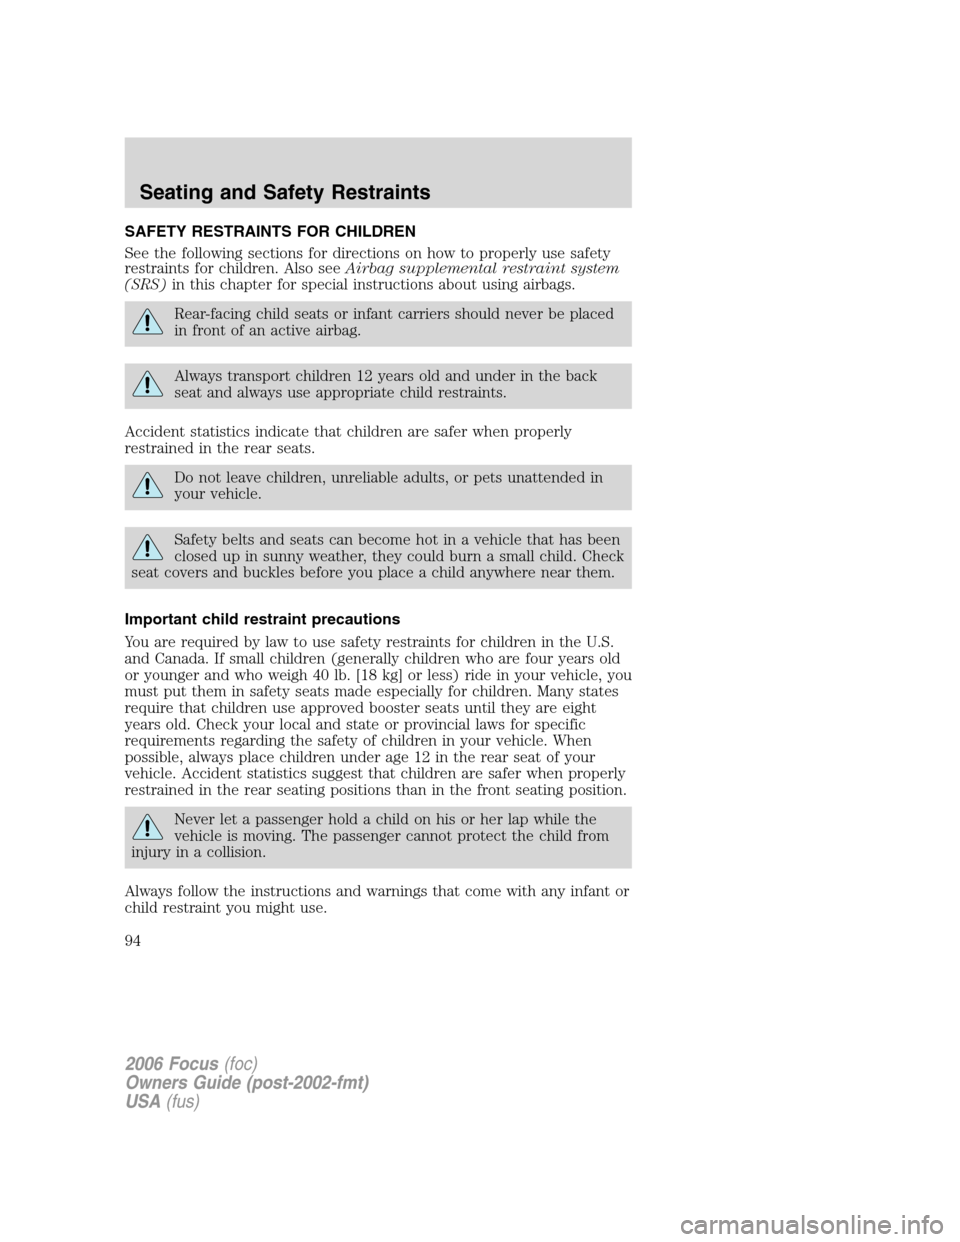 FORD FOCUS 2006 2.G Owners Manual SAFETY RESTRAINTS FOR CHILDREN
See the following sections for directions on how to properly use safety
restraints for children. Also seeAirbag supplemental restraint system
(SRS)in this chapter for sp